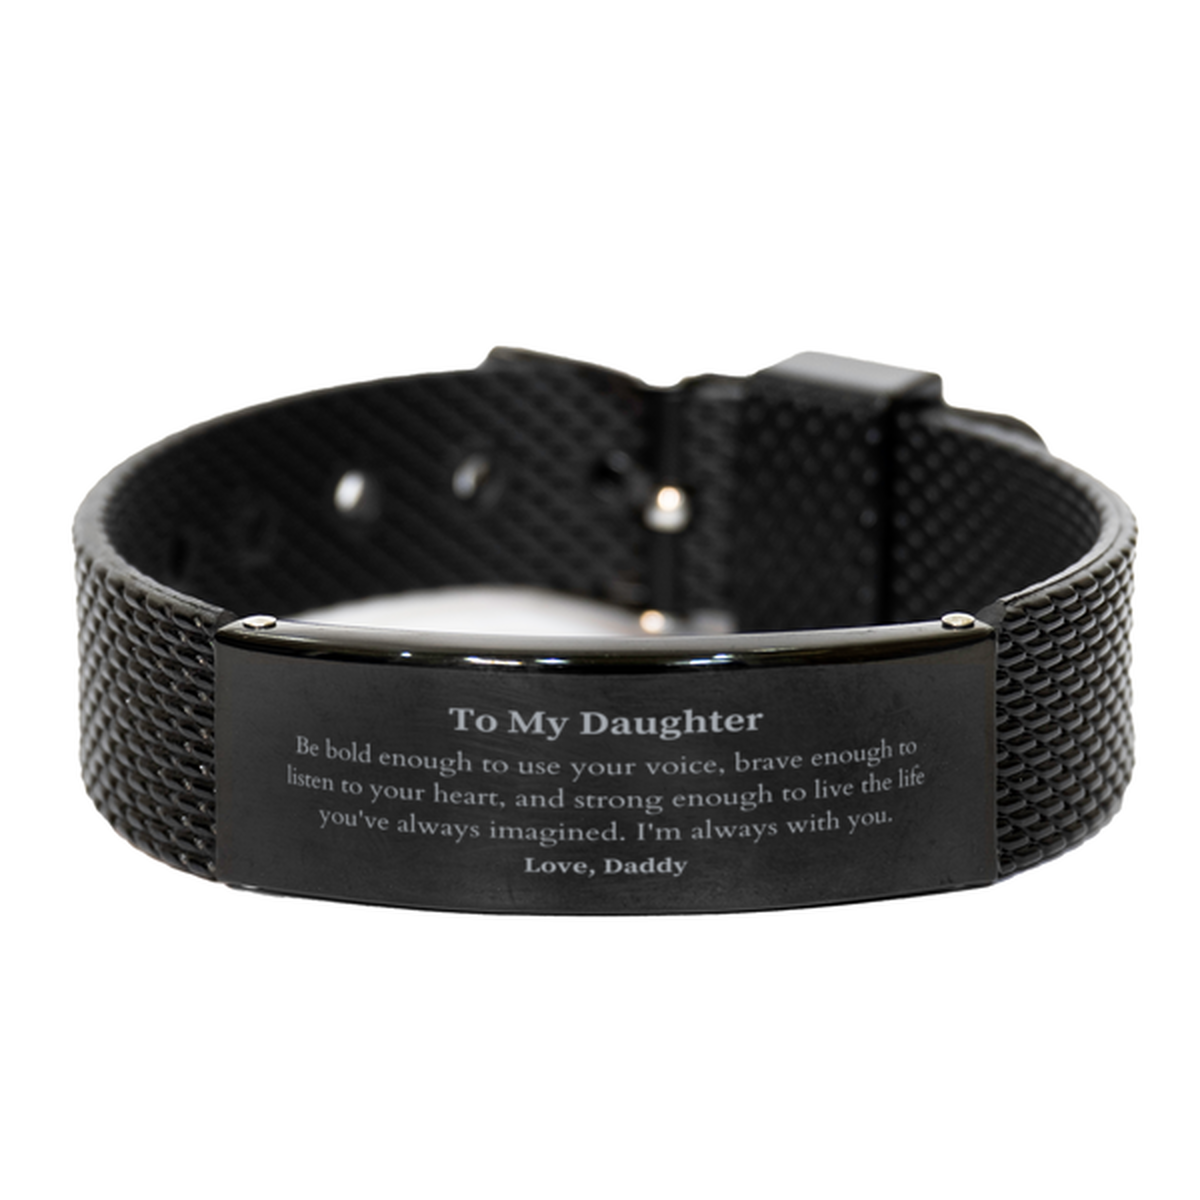 Keepsake Daughter Black Shark Mesh Bracelet Gift Idea Graduation Christmas Birthday Daughter from Daddy, Daughter Be bold enough to use your voice, brave enough to listen to your heart. Love, Daddy